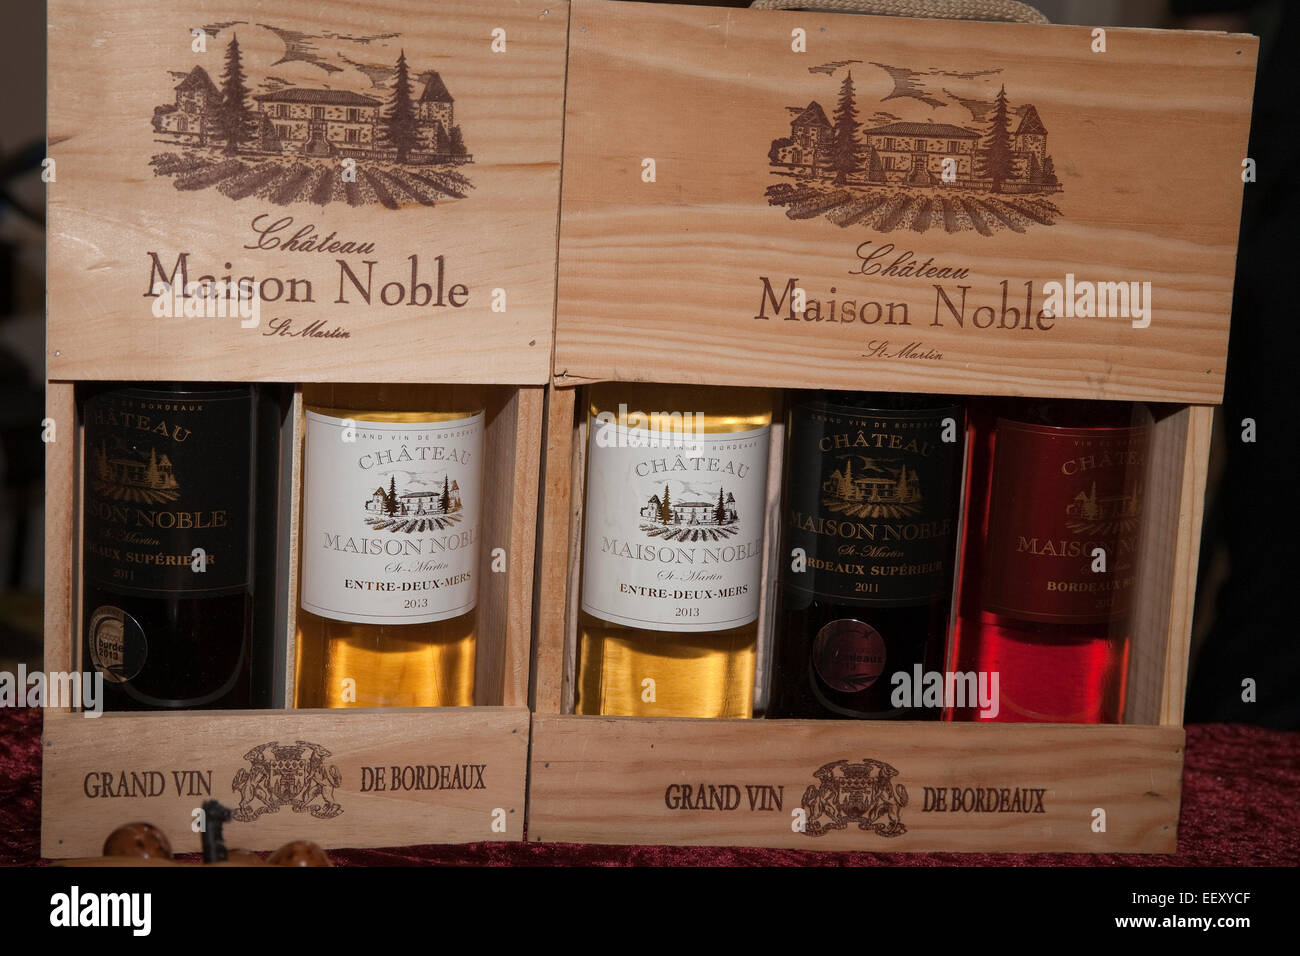 Chateau Maison noble on sale at the France Show 2015 in Olympia London Stock Photo